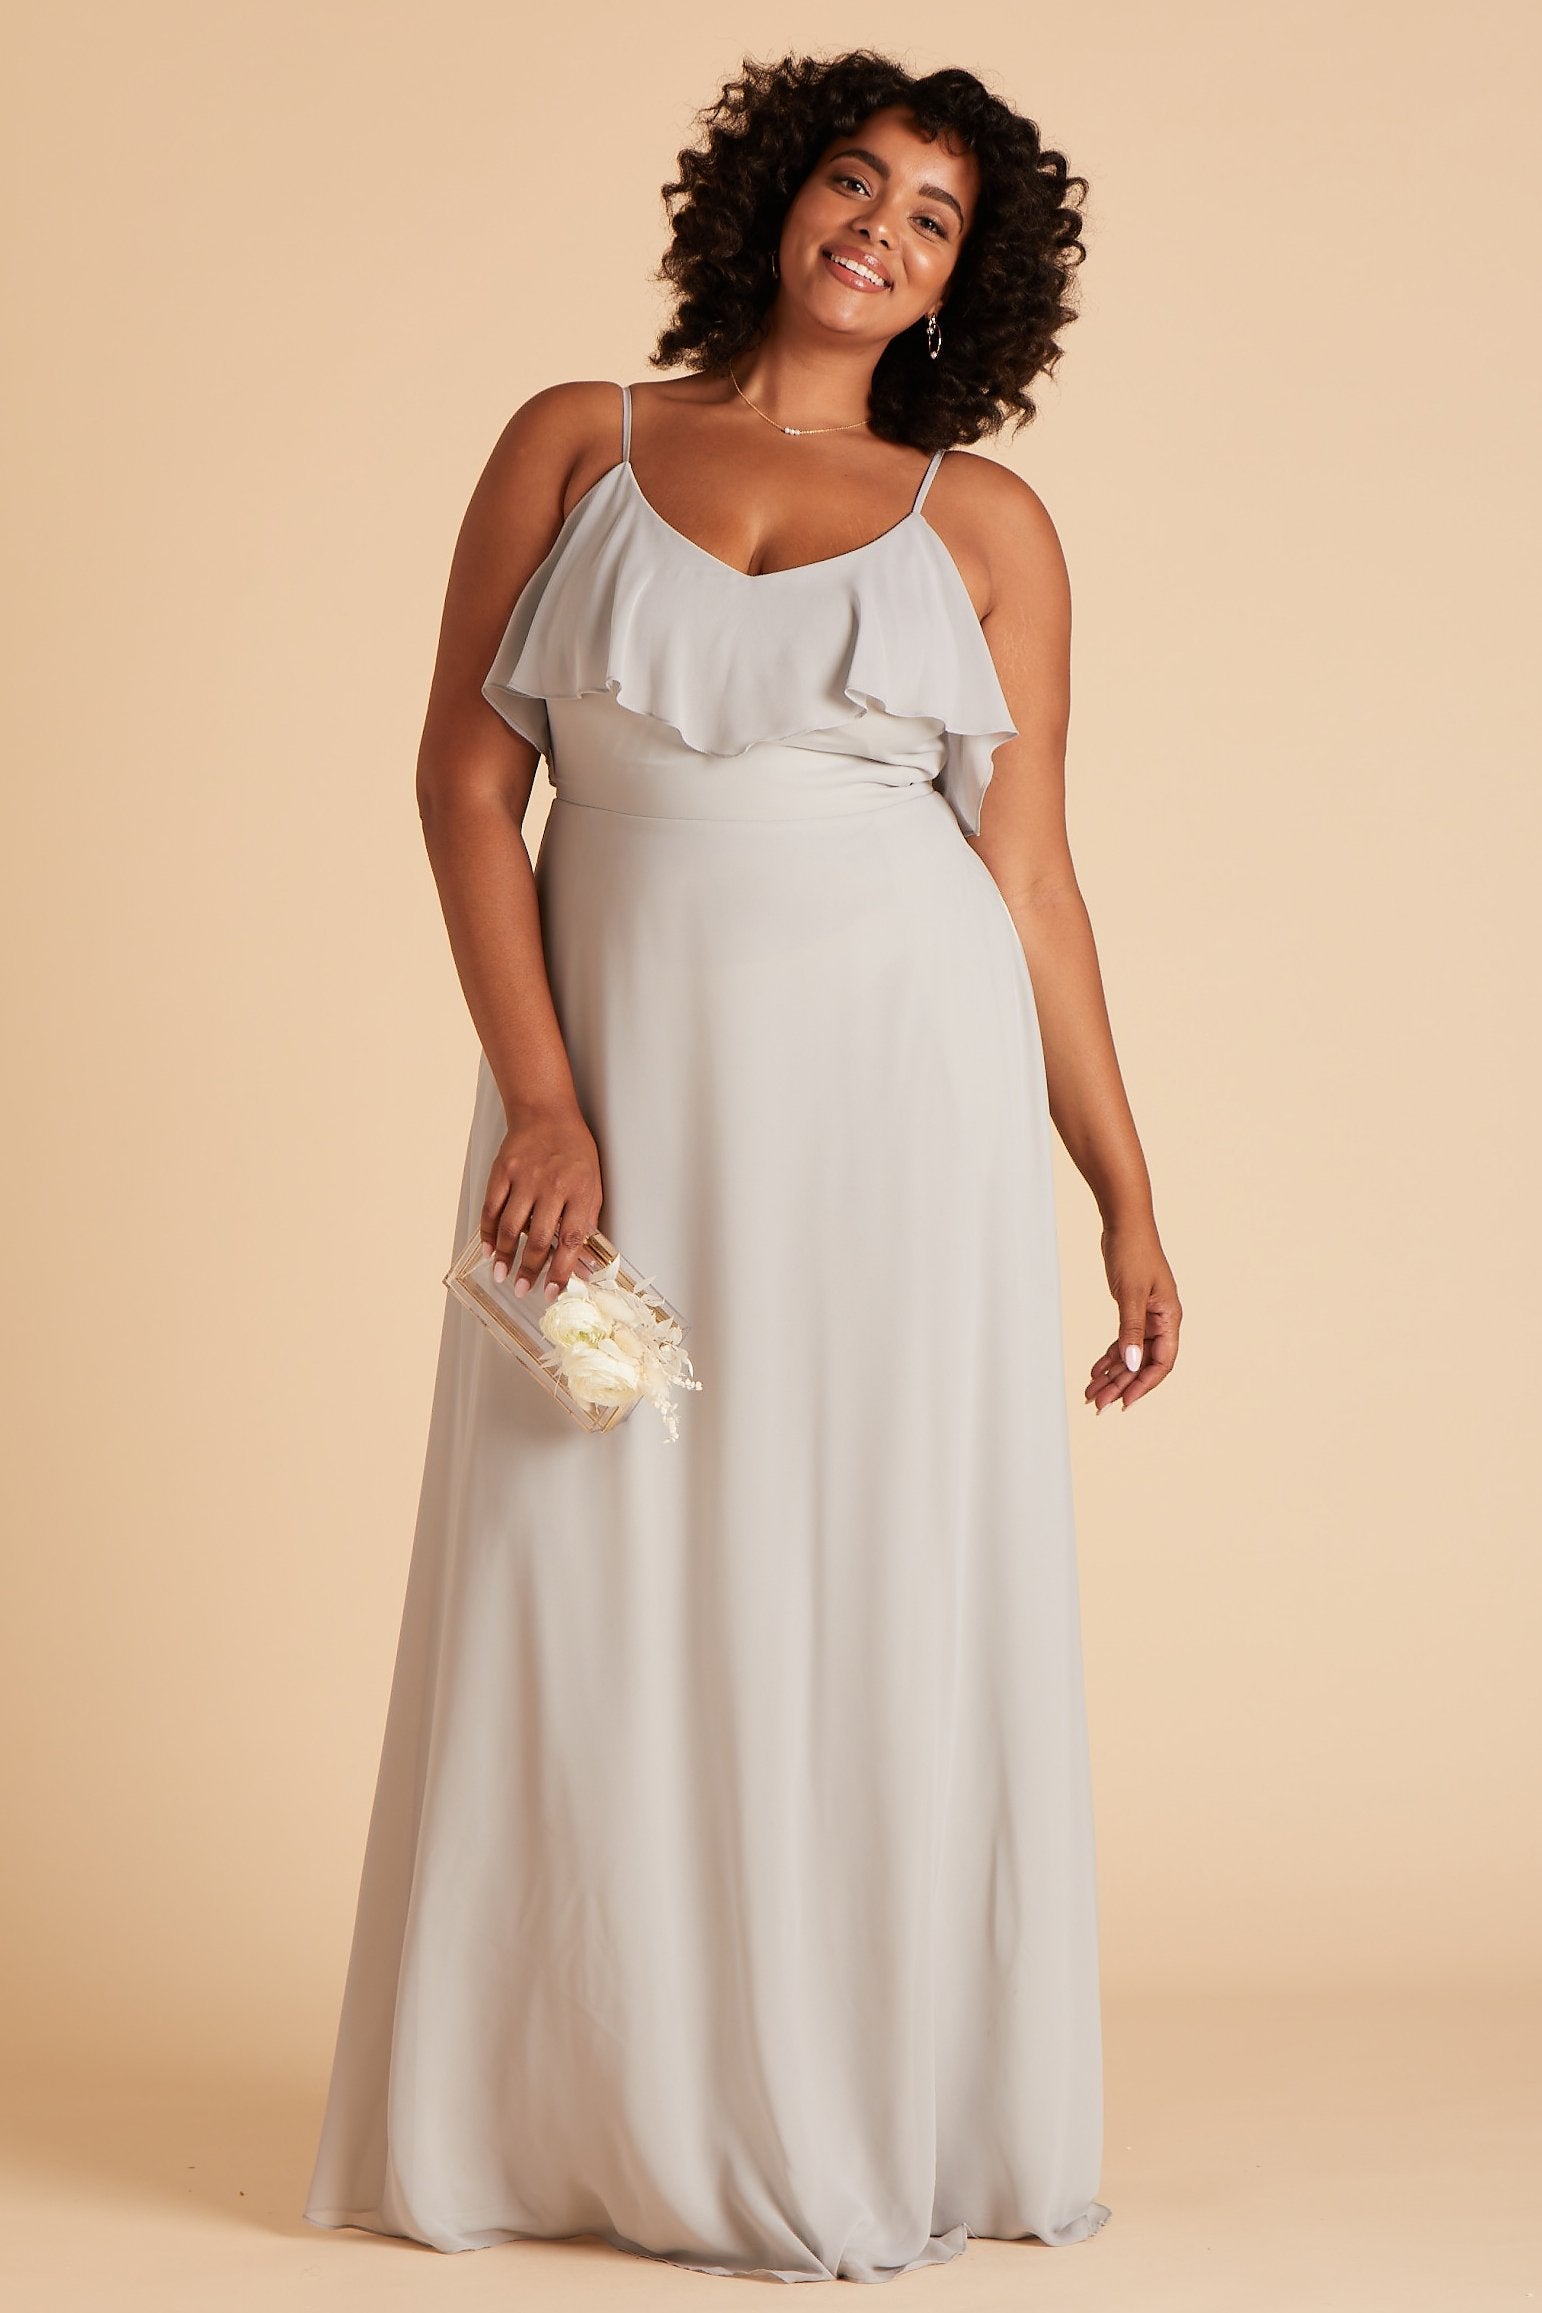 Jane convertible plus size bridesmaid dress in dove gray chiffon by Birdy Grey, front view